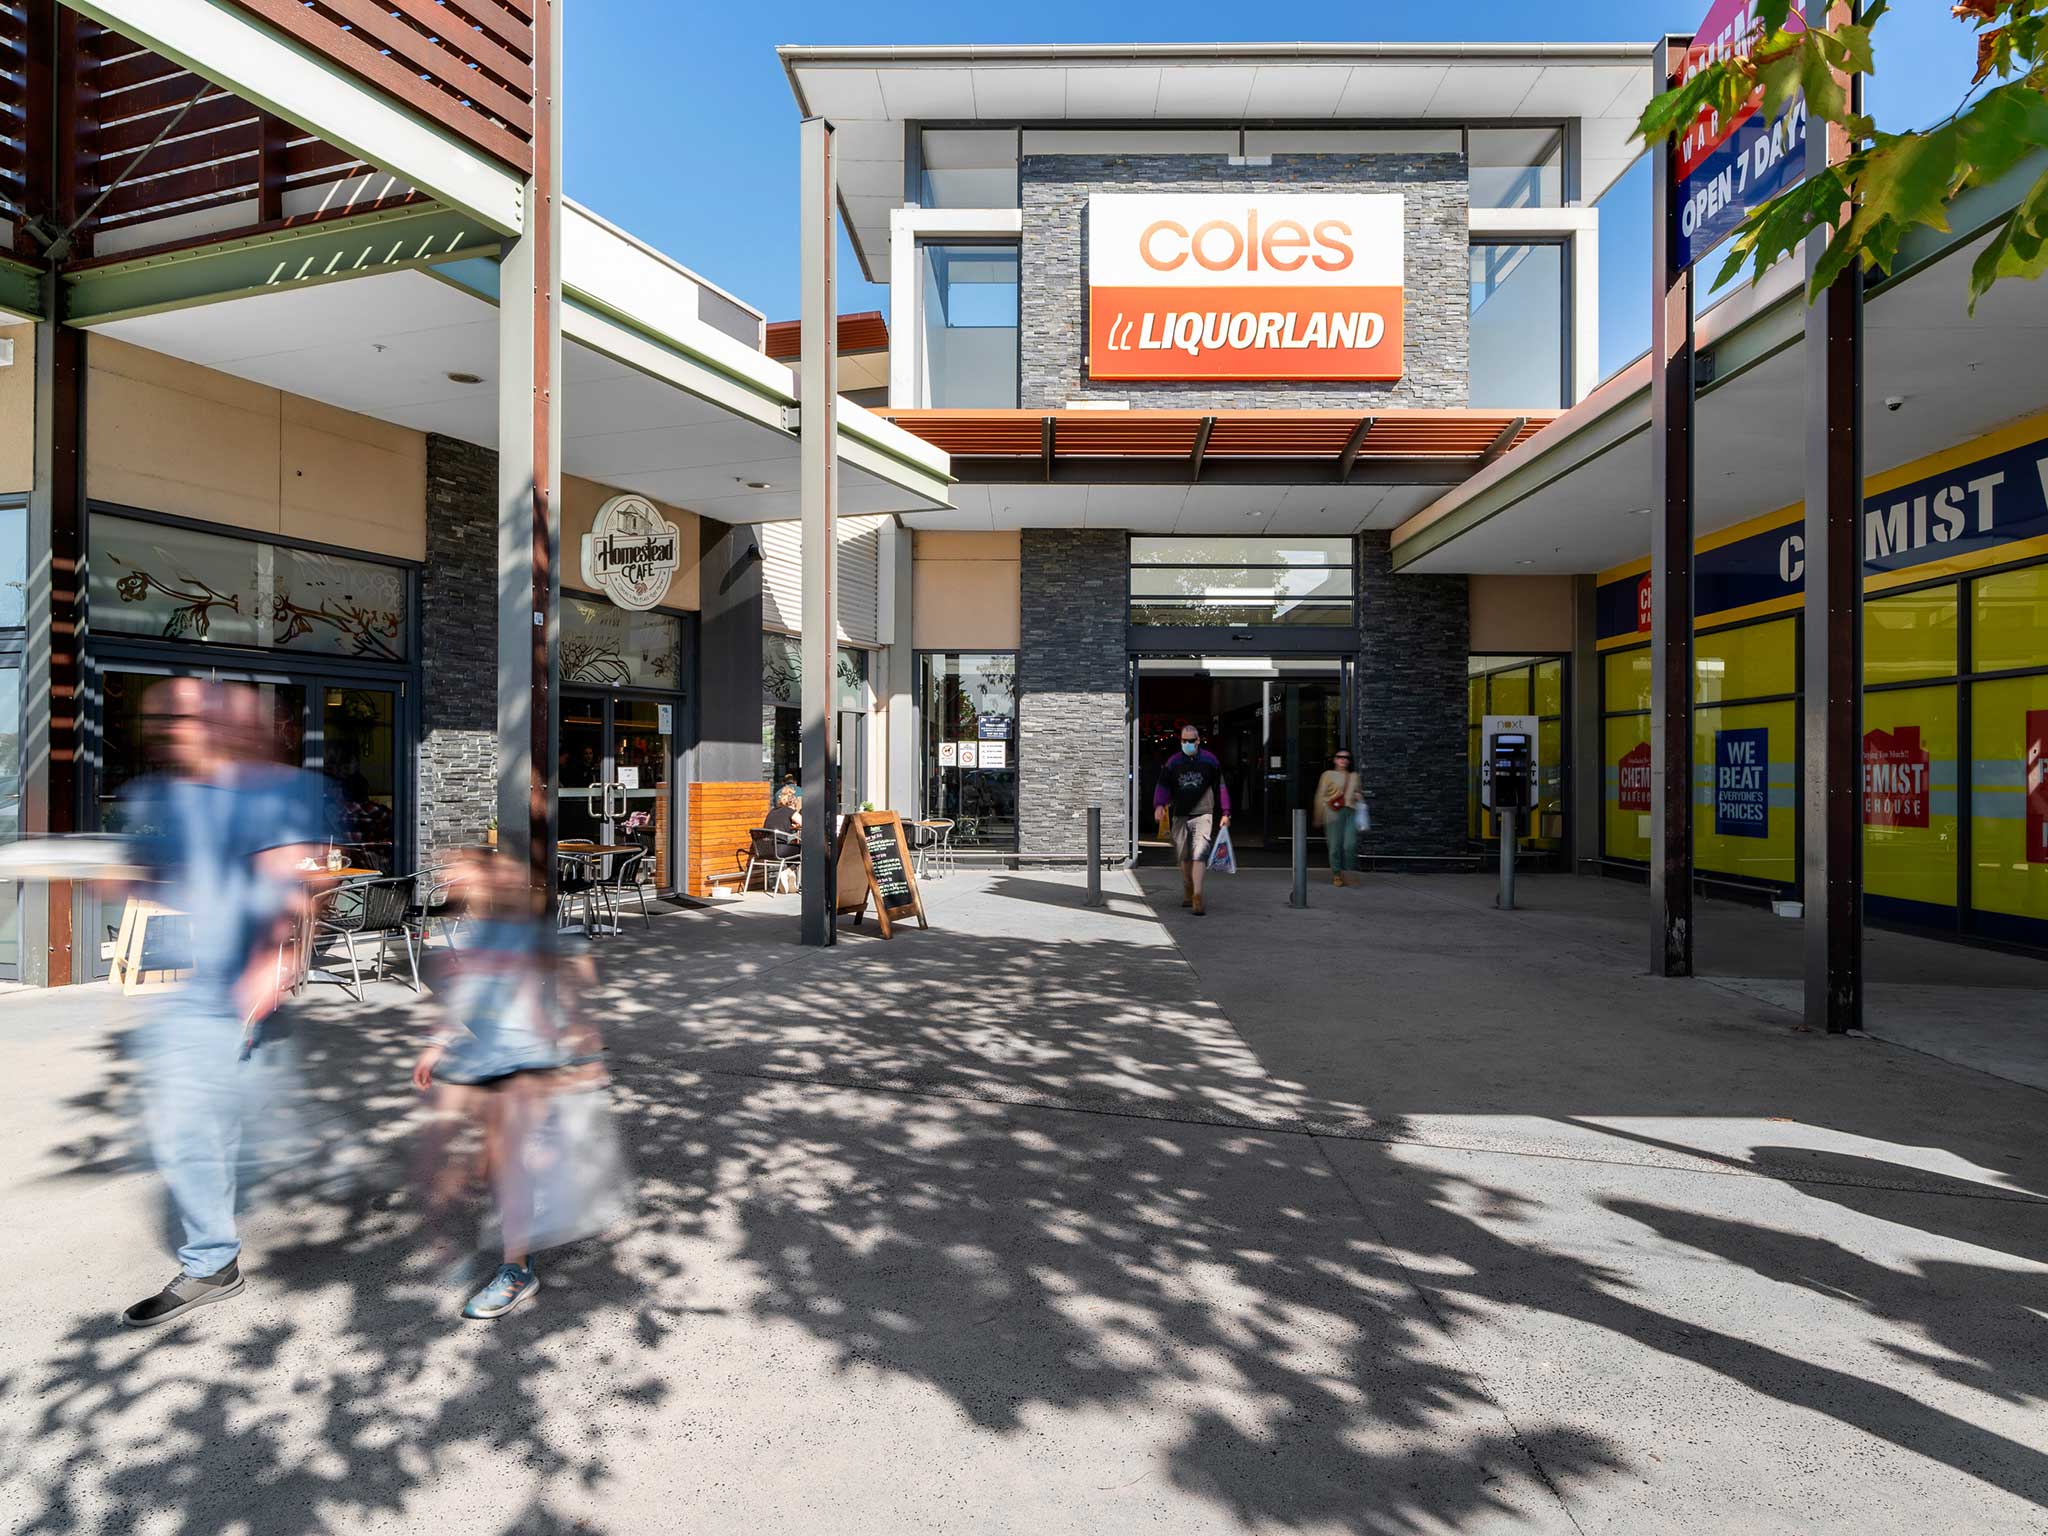 The Heritage Shopping Centre